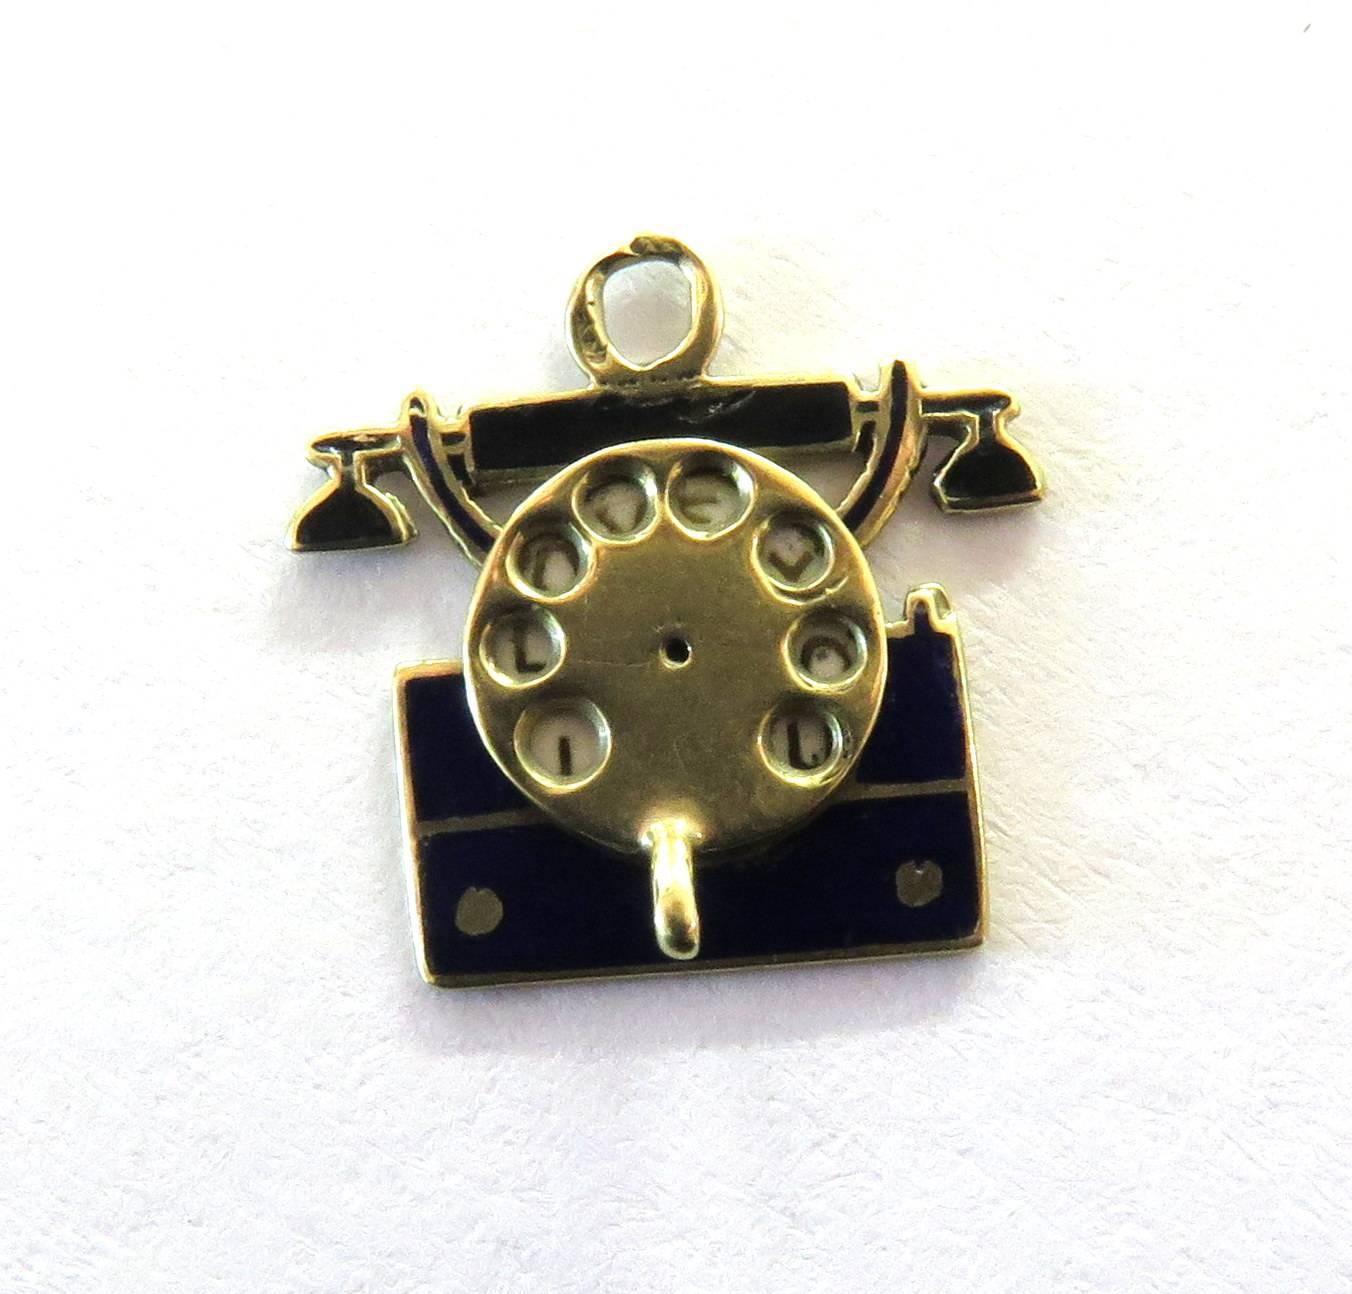 Rare Art Deco Enamel Movable Telephone Gold Charm Dated 1937 For Sale 1